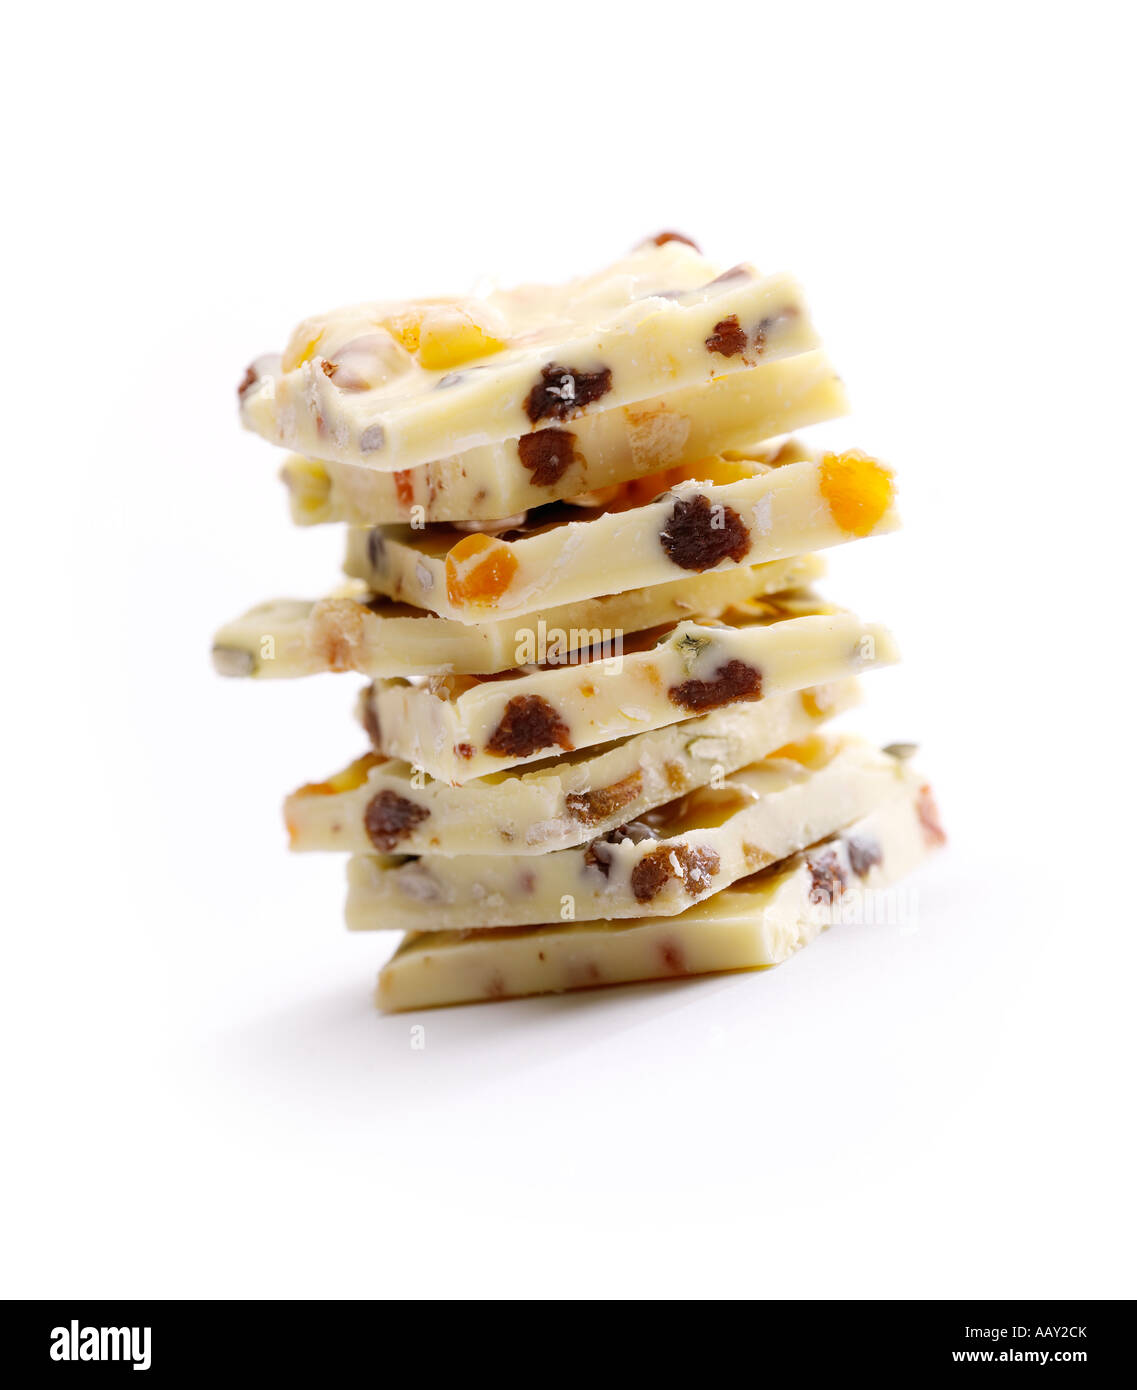 A stack of hand made white chocolate squares on a white background Stock Photo